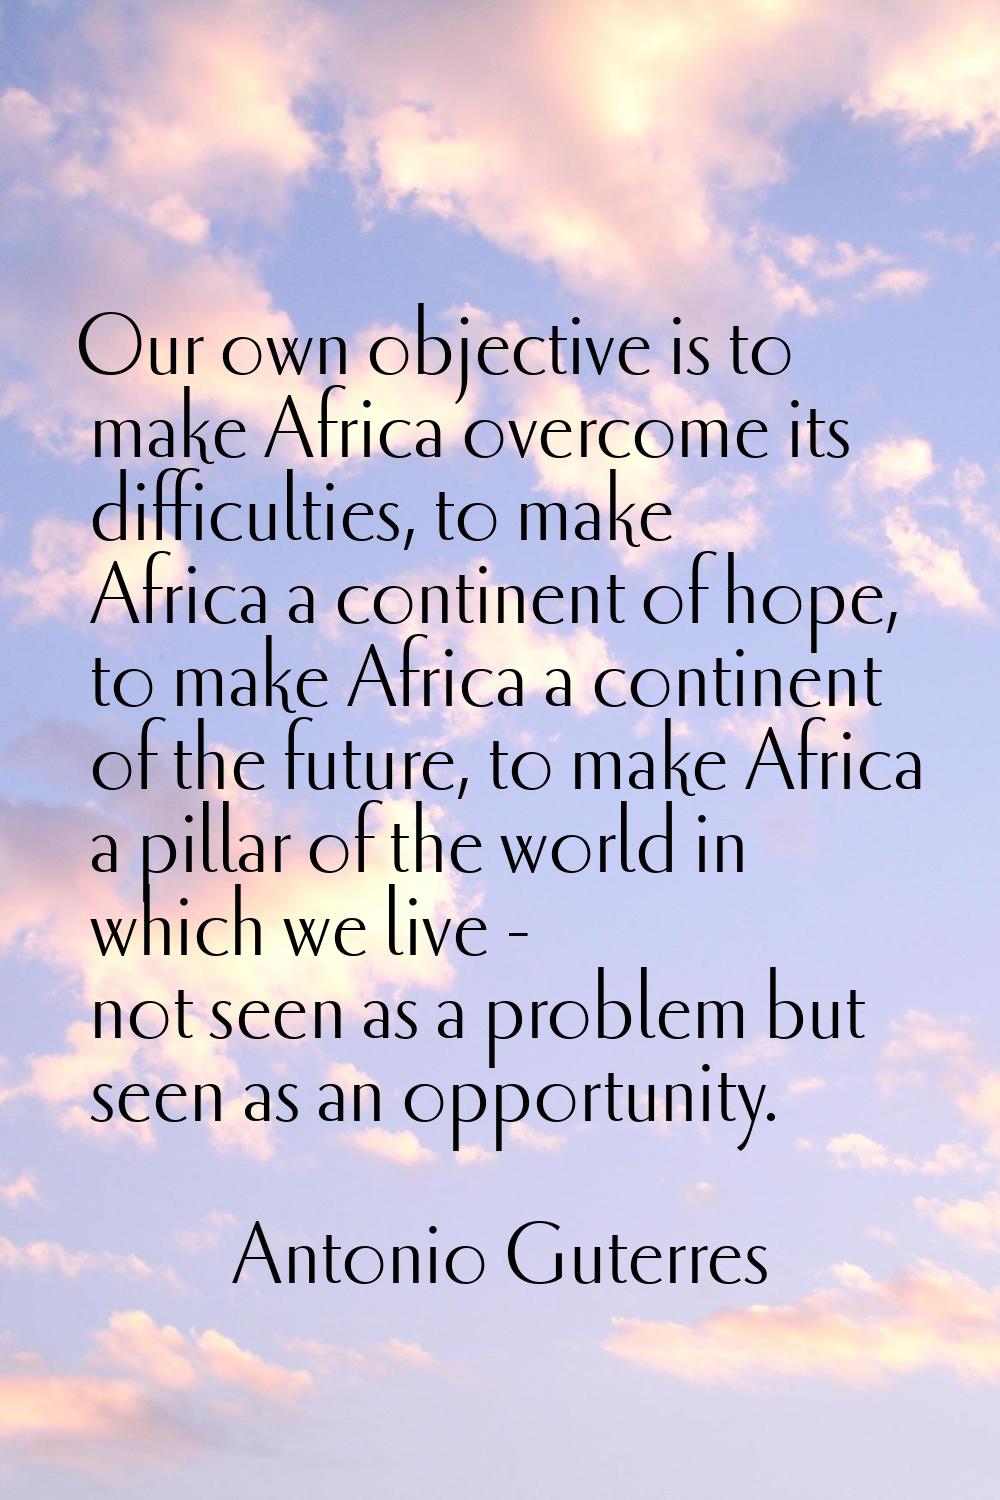 Our own objective is to make Africa overcome its difficulties, to make Africa a continent of hope, 